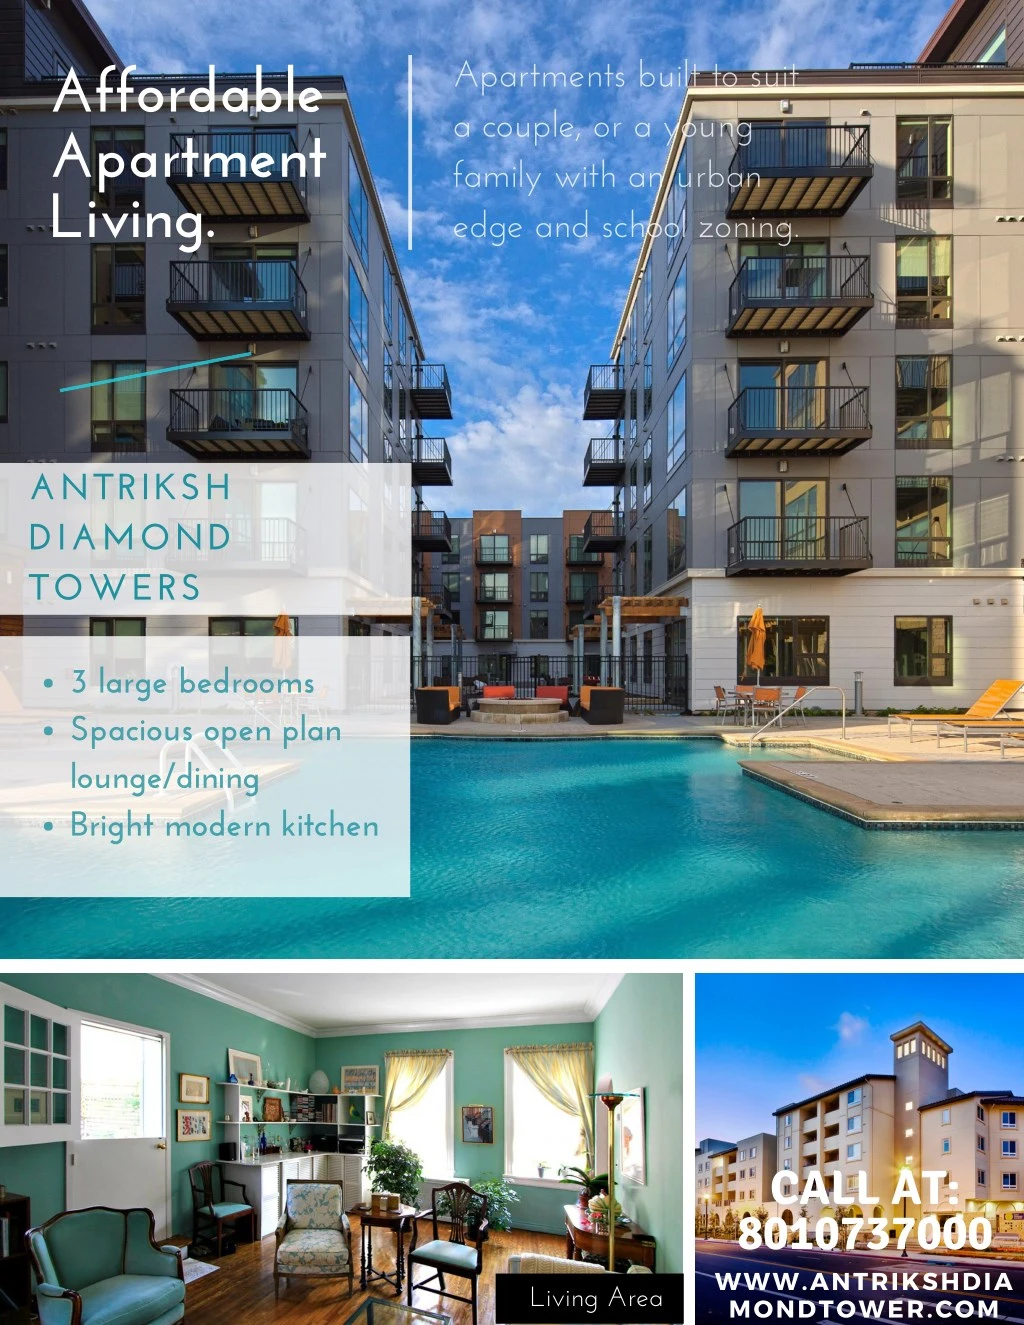 apartments built to suit a couple or a young